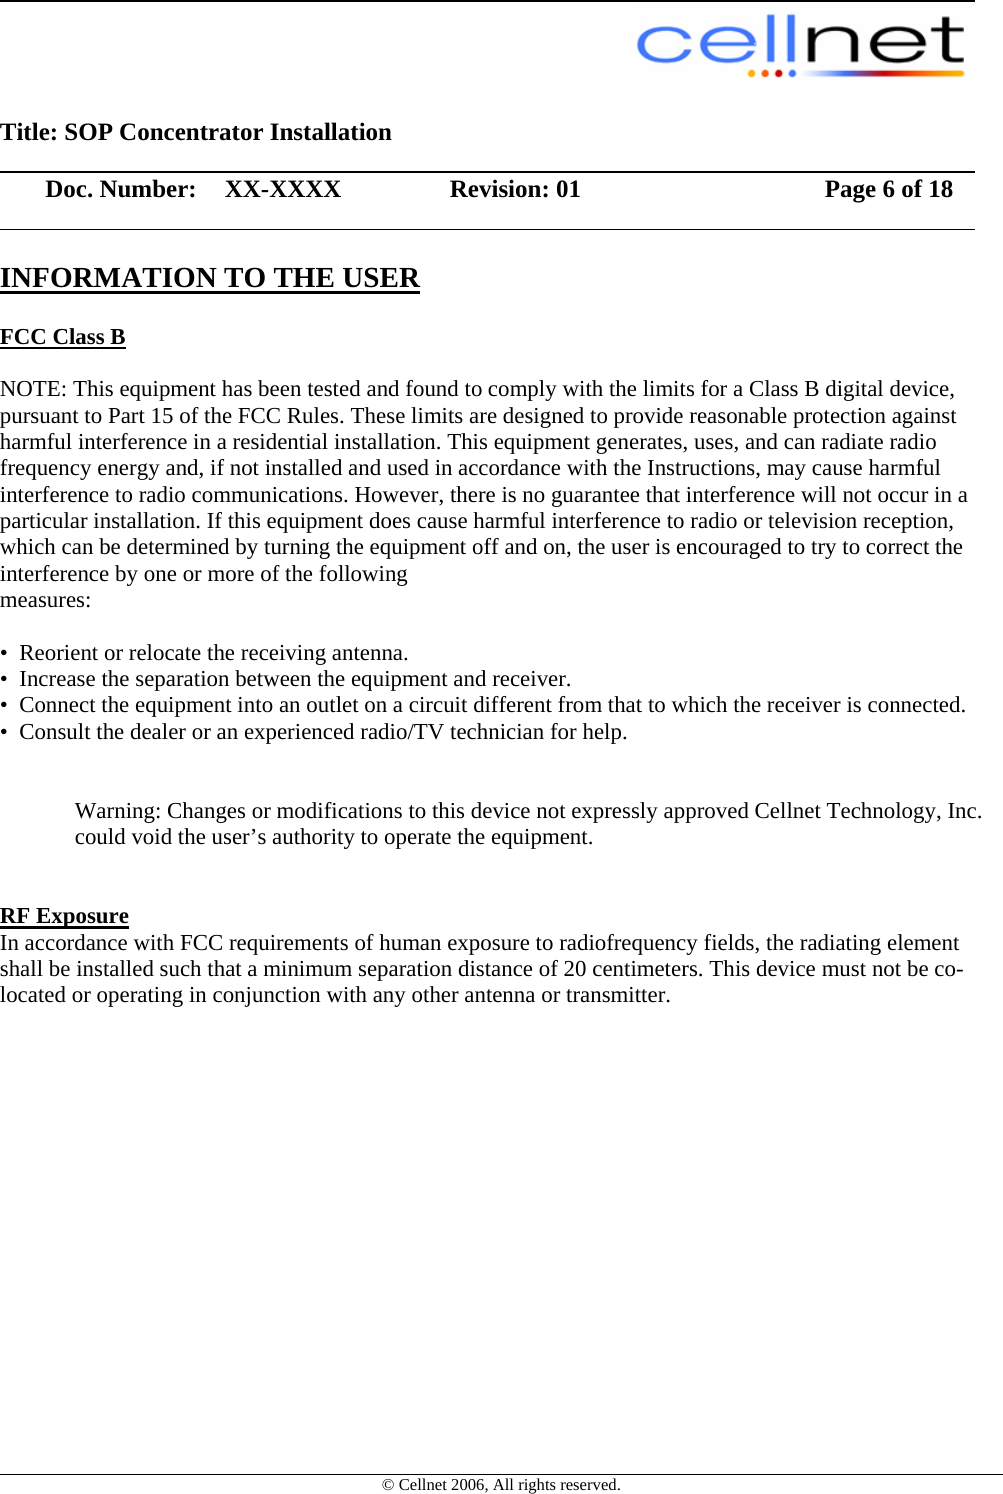                                                                                                         Title: SOP Concentrator Installation                  Doc. Number:  XX-XXXX             Revision: 01        Page 6 of 18                    © Cellnet 2006, All rights reserved. INFORMATION TO THE USER  FCC Class B   NOTE: This equipment has been tested and found to comply with the limits for a Class B digital device, pursuant to Part 15 of the FCC Rules. These limits are designed to provide reasonable protection against harmful interference in a residential installation. This equipment generates, uses, and can radiate radio frequency energy and, if not installed and used in accordance with the Instructions, may cause harmful interference to radio communications. However, there is no guarantee that interference will not occur in a particular installation. If this equipment does cause harmful interference to radio or television reception, which can be determined by turning the equipment off and on, the user is encouraged to try to correct the interference by one or more of the following  measures:    •  Reorient or relocate the receiving antenna.   •  Increase the separation between the equipment and receiver.   •  Connect the equipment into an outlet on a circuit different from that to which the receiver is connected.   •  Consult the dealer or an experienced radio/TV technician for help.     Warning: Changes or modifications to this device not expressly approved Cellnet Technology, Inc. could void the user’s authority to operate the equipment.      RF Exposure   In accordance with FCC requirements of human exposure to radiofrequency fields, the radiating element shall be installed such that a minimum separation distance of 20 centimeters. This device must not be co-located or operating in conjunction with any other antenna or transmitter.   